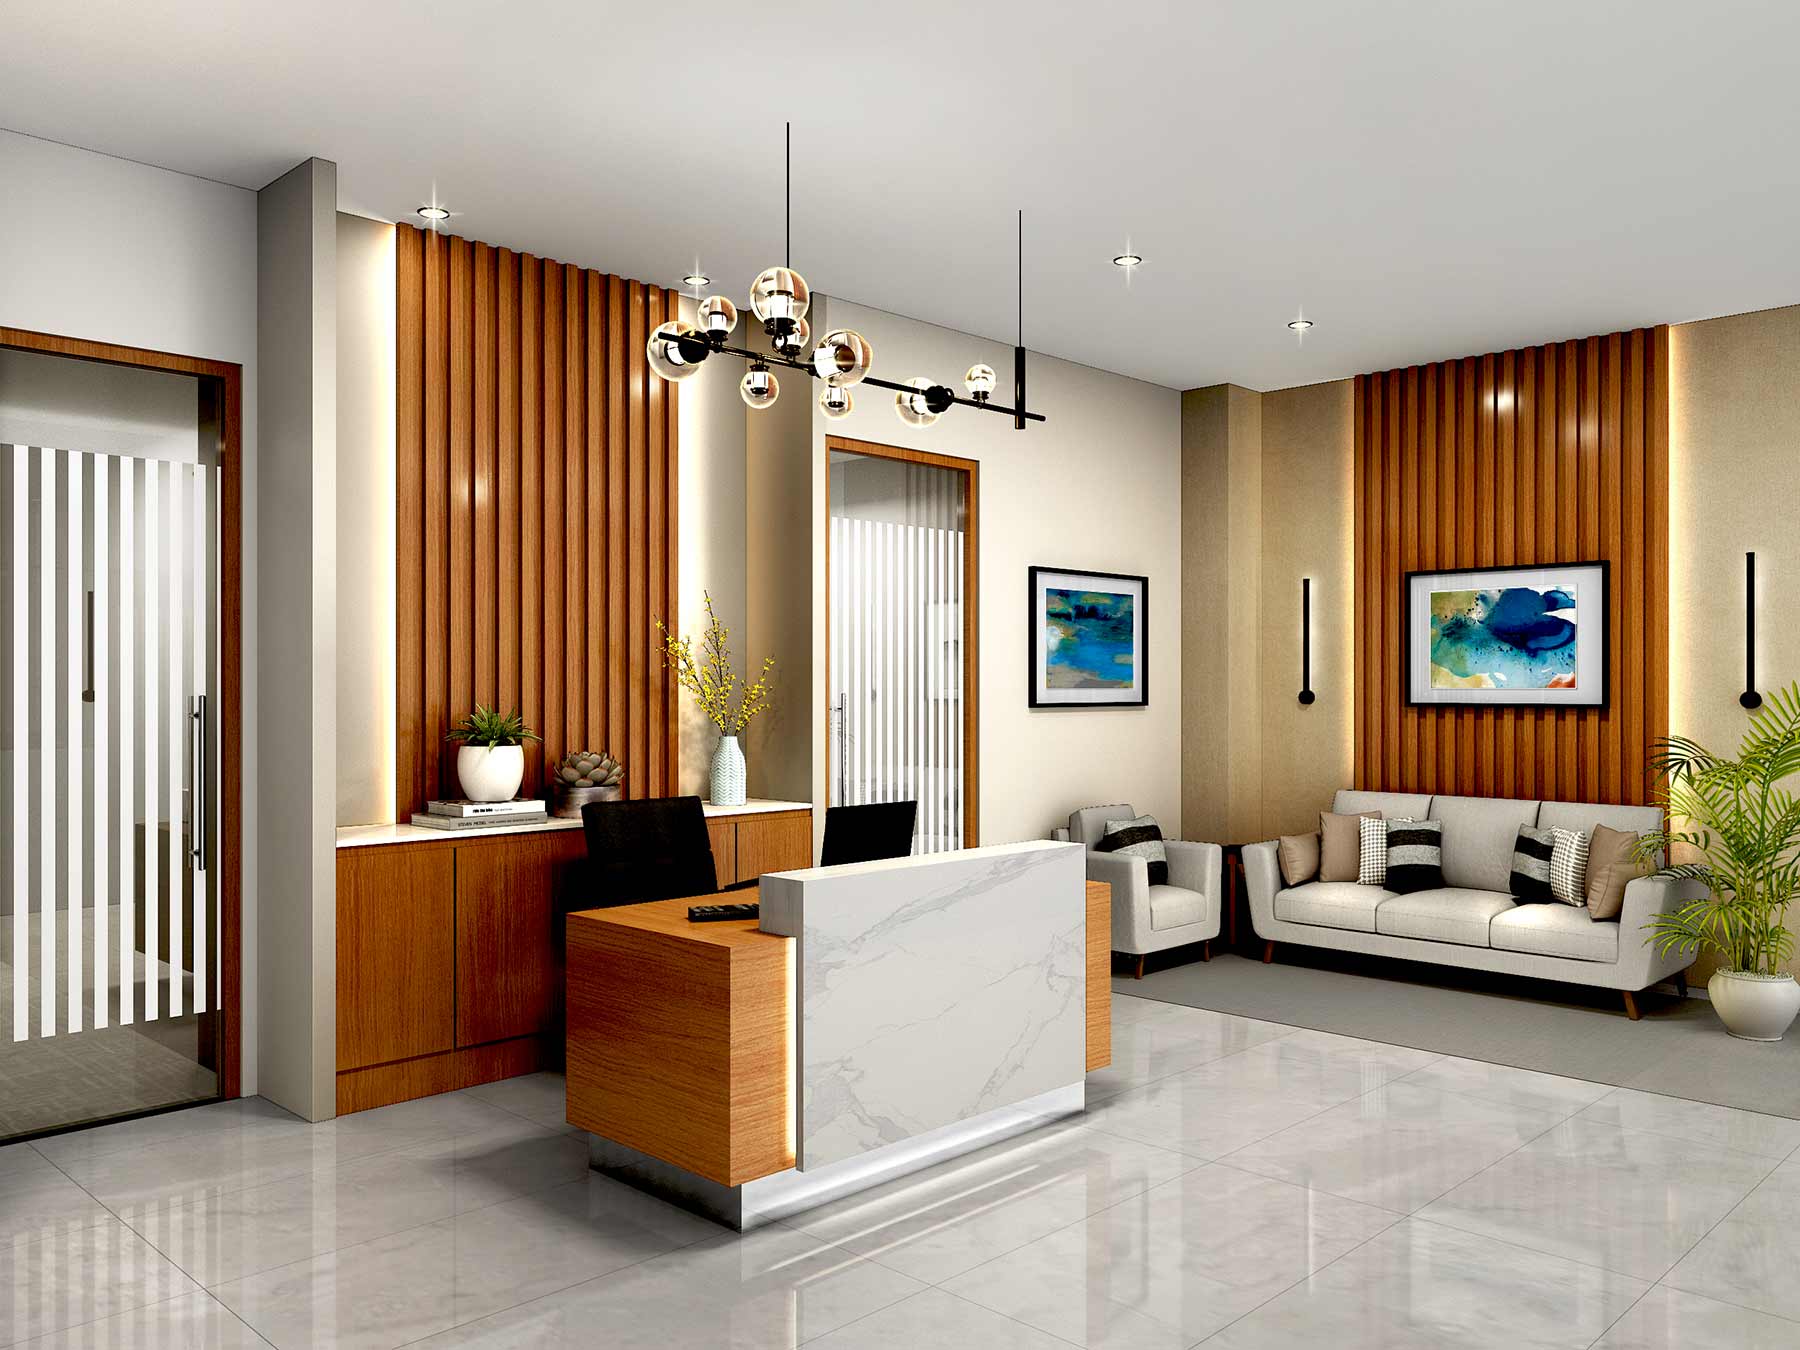 Modern office reception area designed by Designers Gang featuring a curved reception desk with a white quartz countertop and wood veneer paneling, black leather waiting chairs, a geometric area rug, and a statement pendant lamp. Large windows with white blinds bathe the space in natural light.